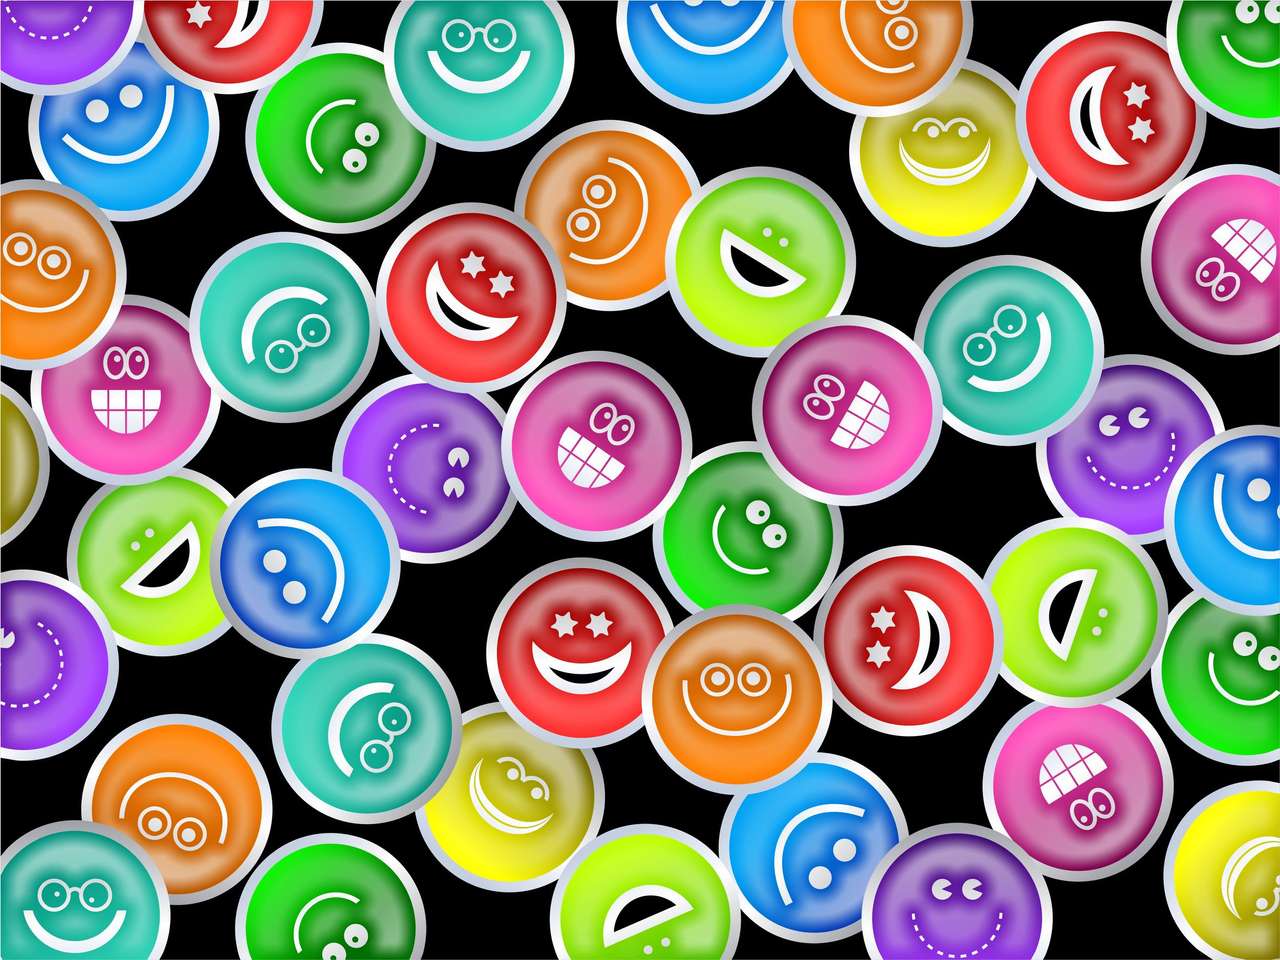 Colorful smileys puzzle online from photo